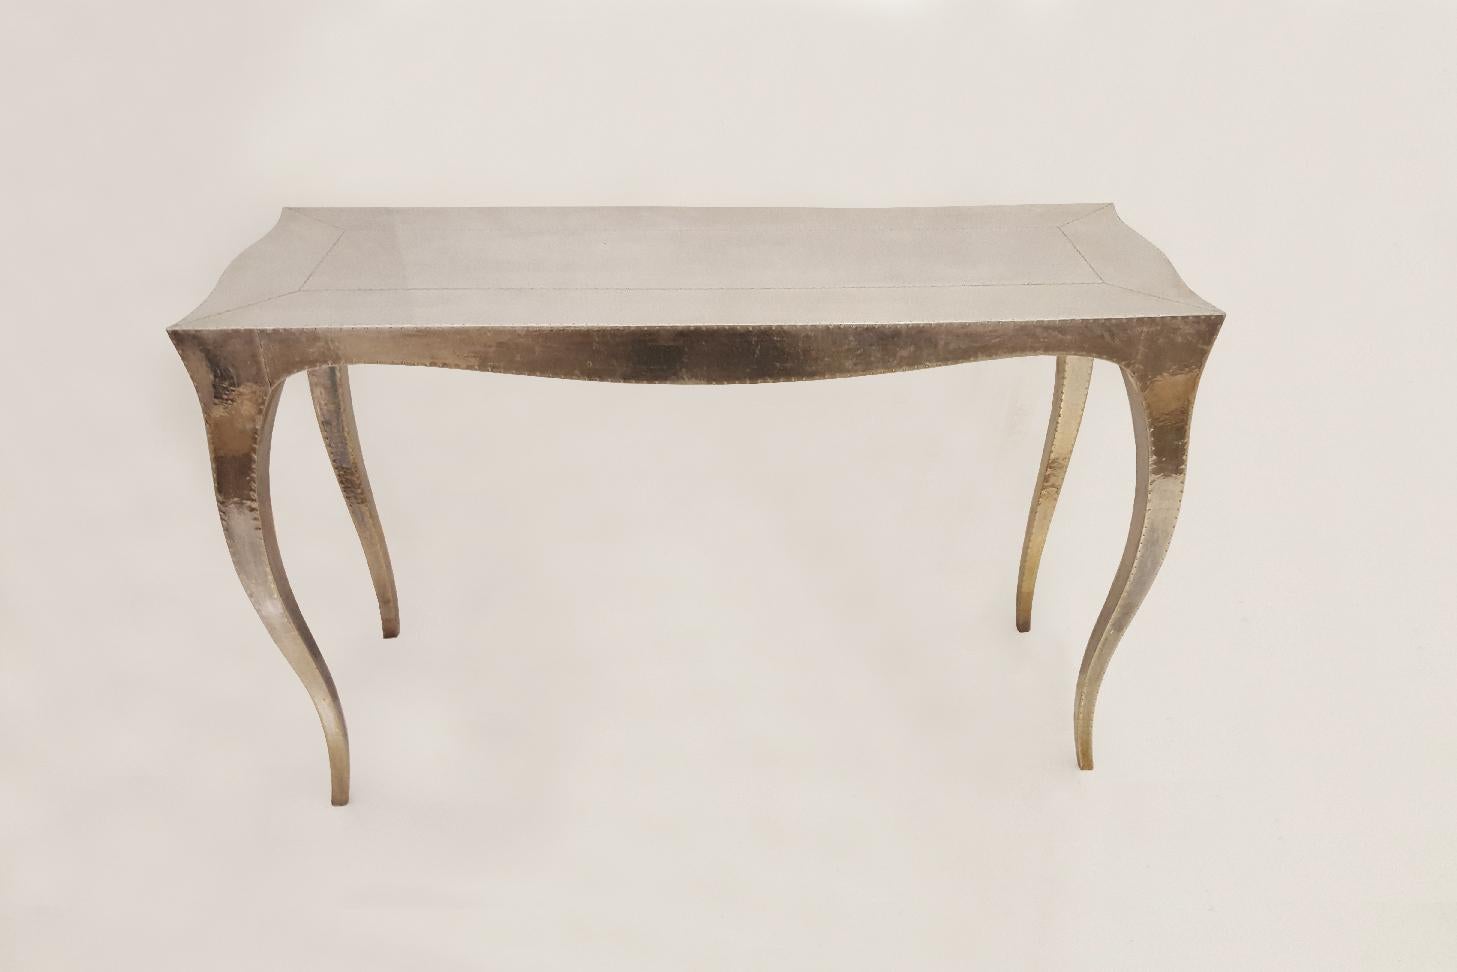 Louise Console Art Deco Desks and Writing Tables Mid. Hammered Antique Bronze For Sale 5